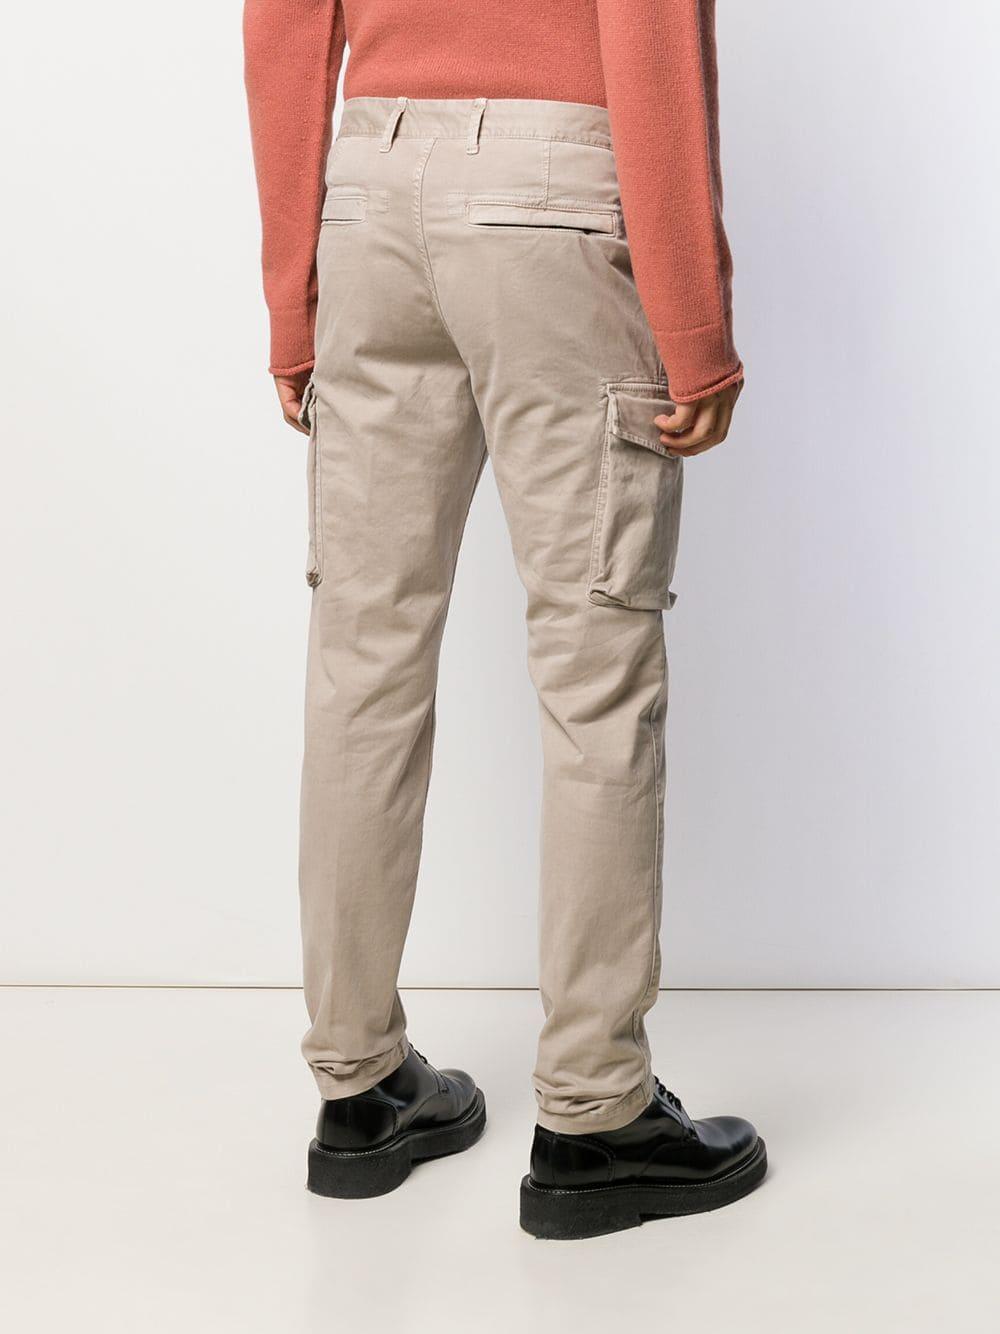 Stone Island Cotton Cargo Trousers in Natural for Men - Lyst